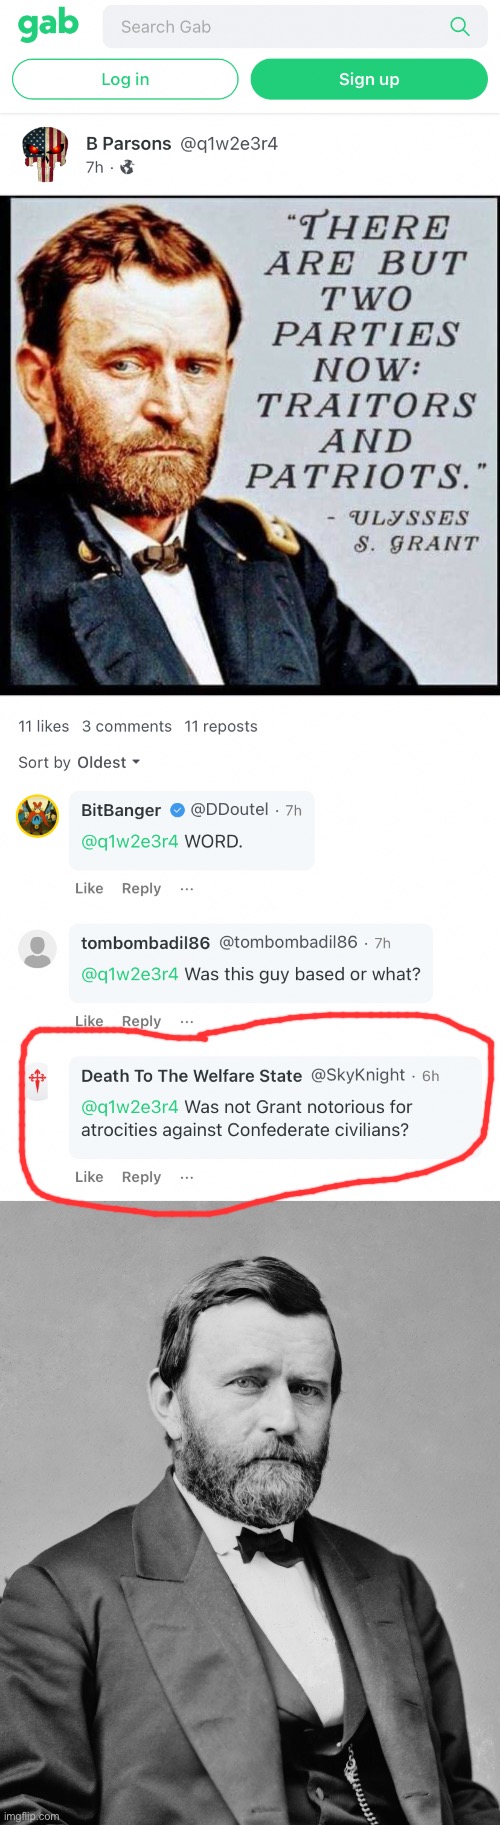 Quizzical U.S. Grant says these Gab folks may have misinterpreted his quote | image tagged in ulysses grant,social media,conservative logic,traitors,civil war,historical meme | made w/ Imgflip meme maker